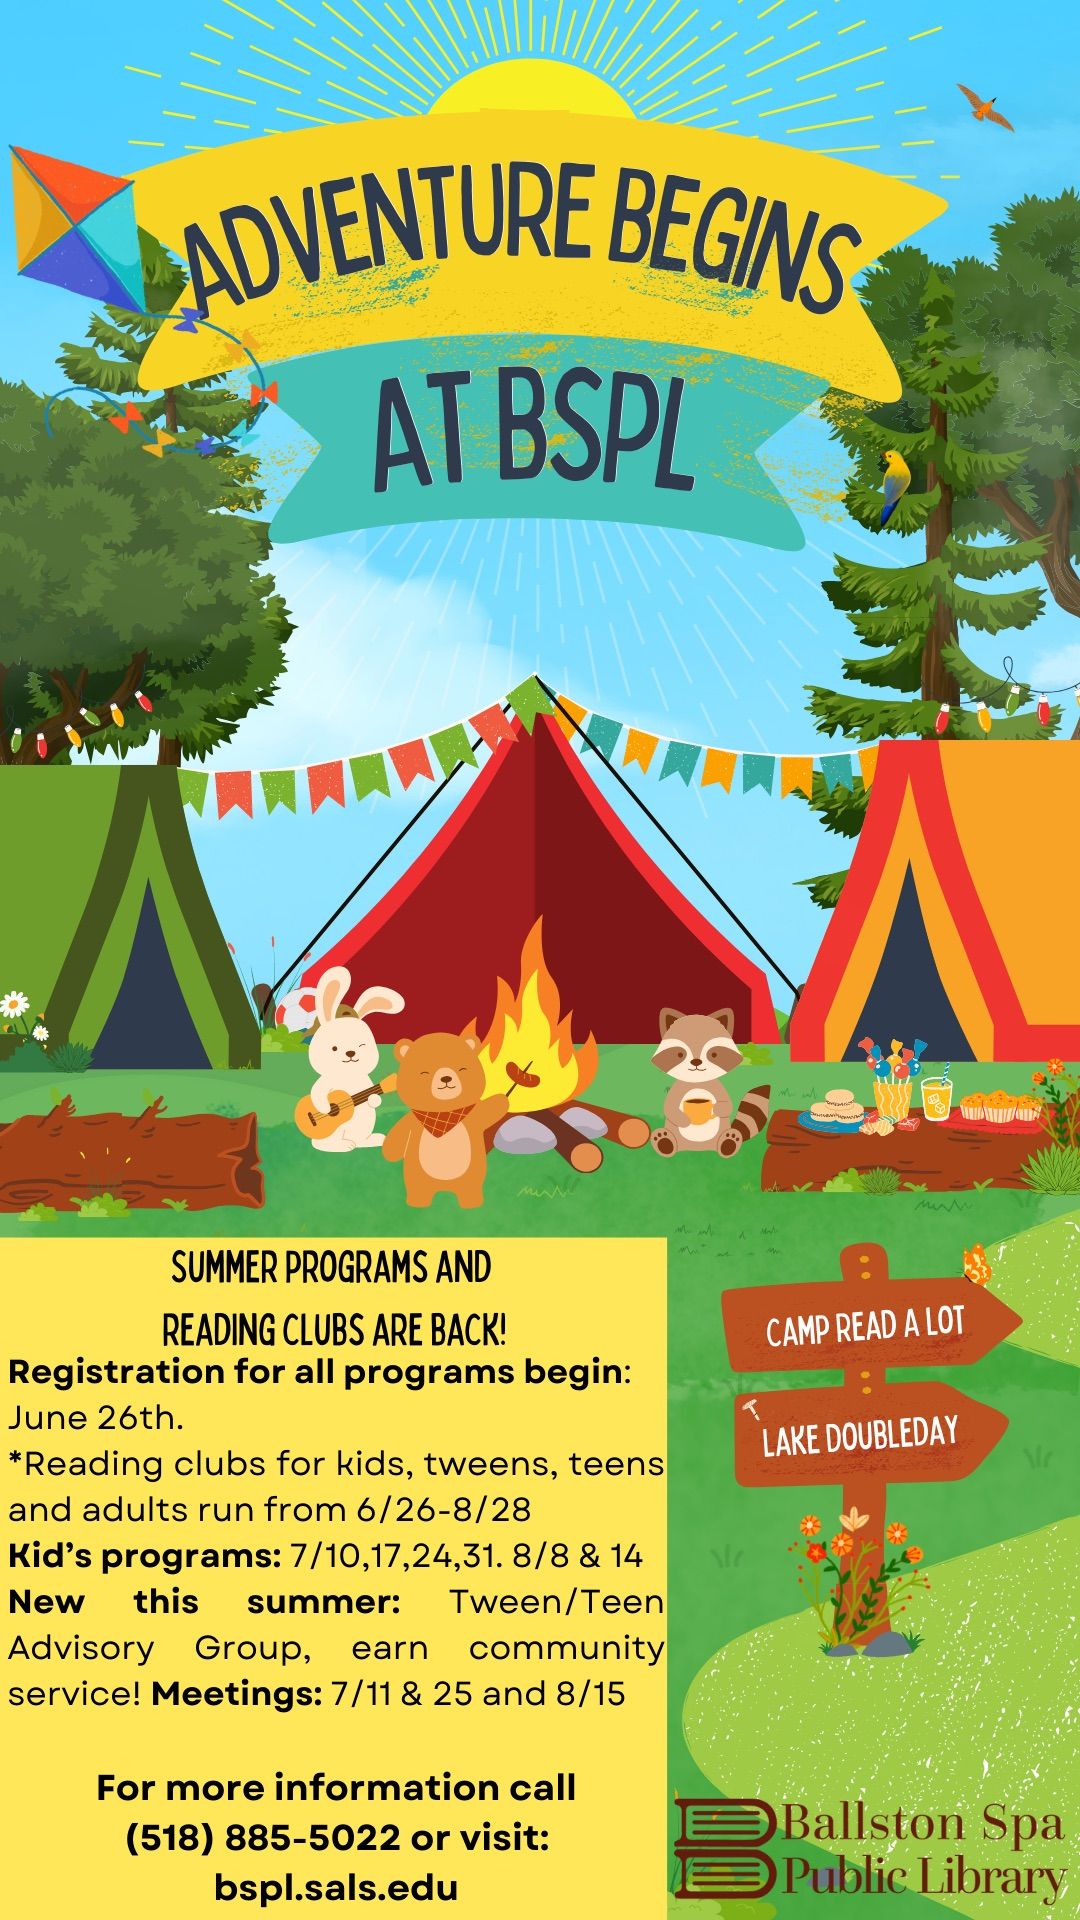 BSPL Summer Programs and Reading Clubs